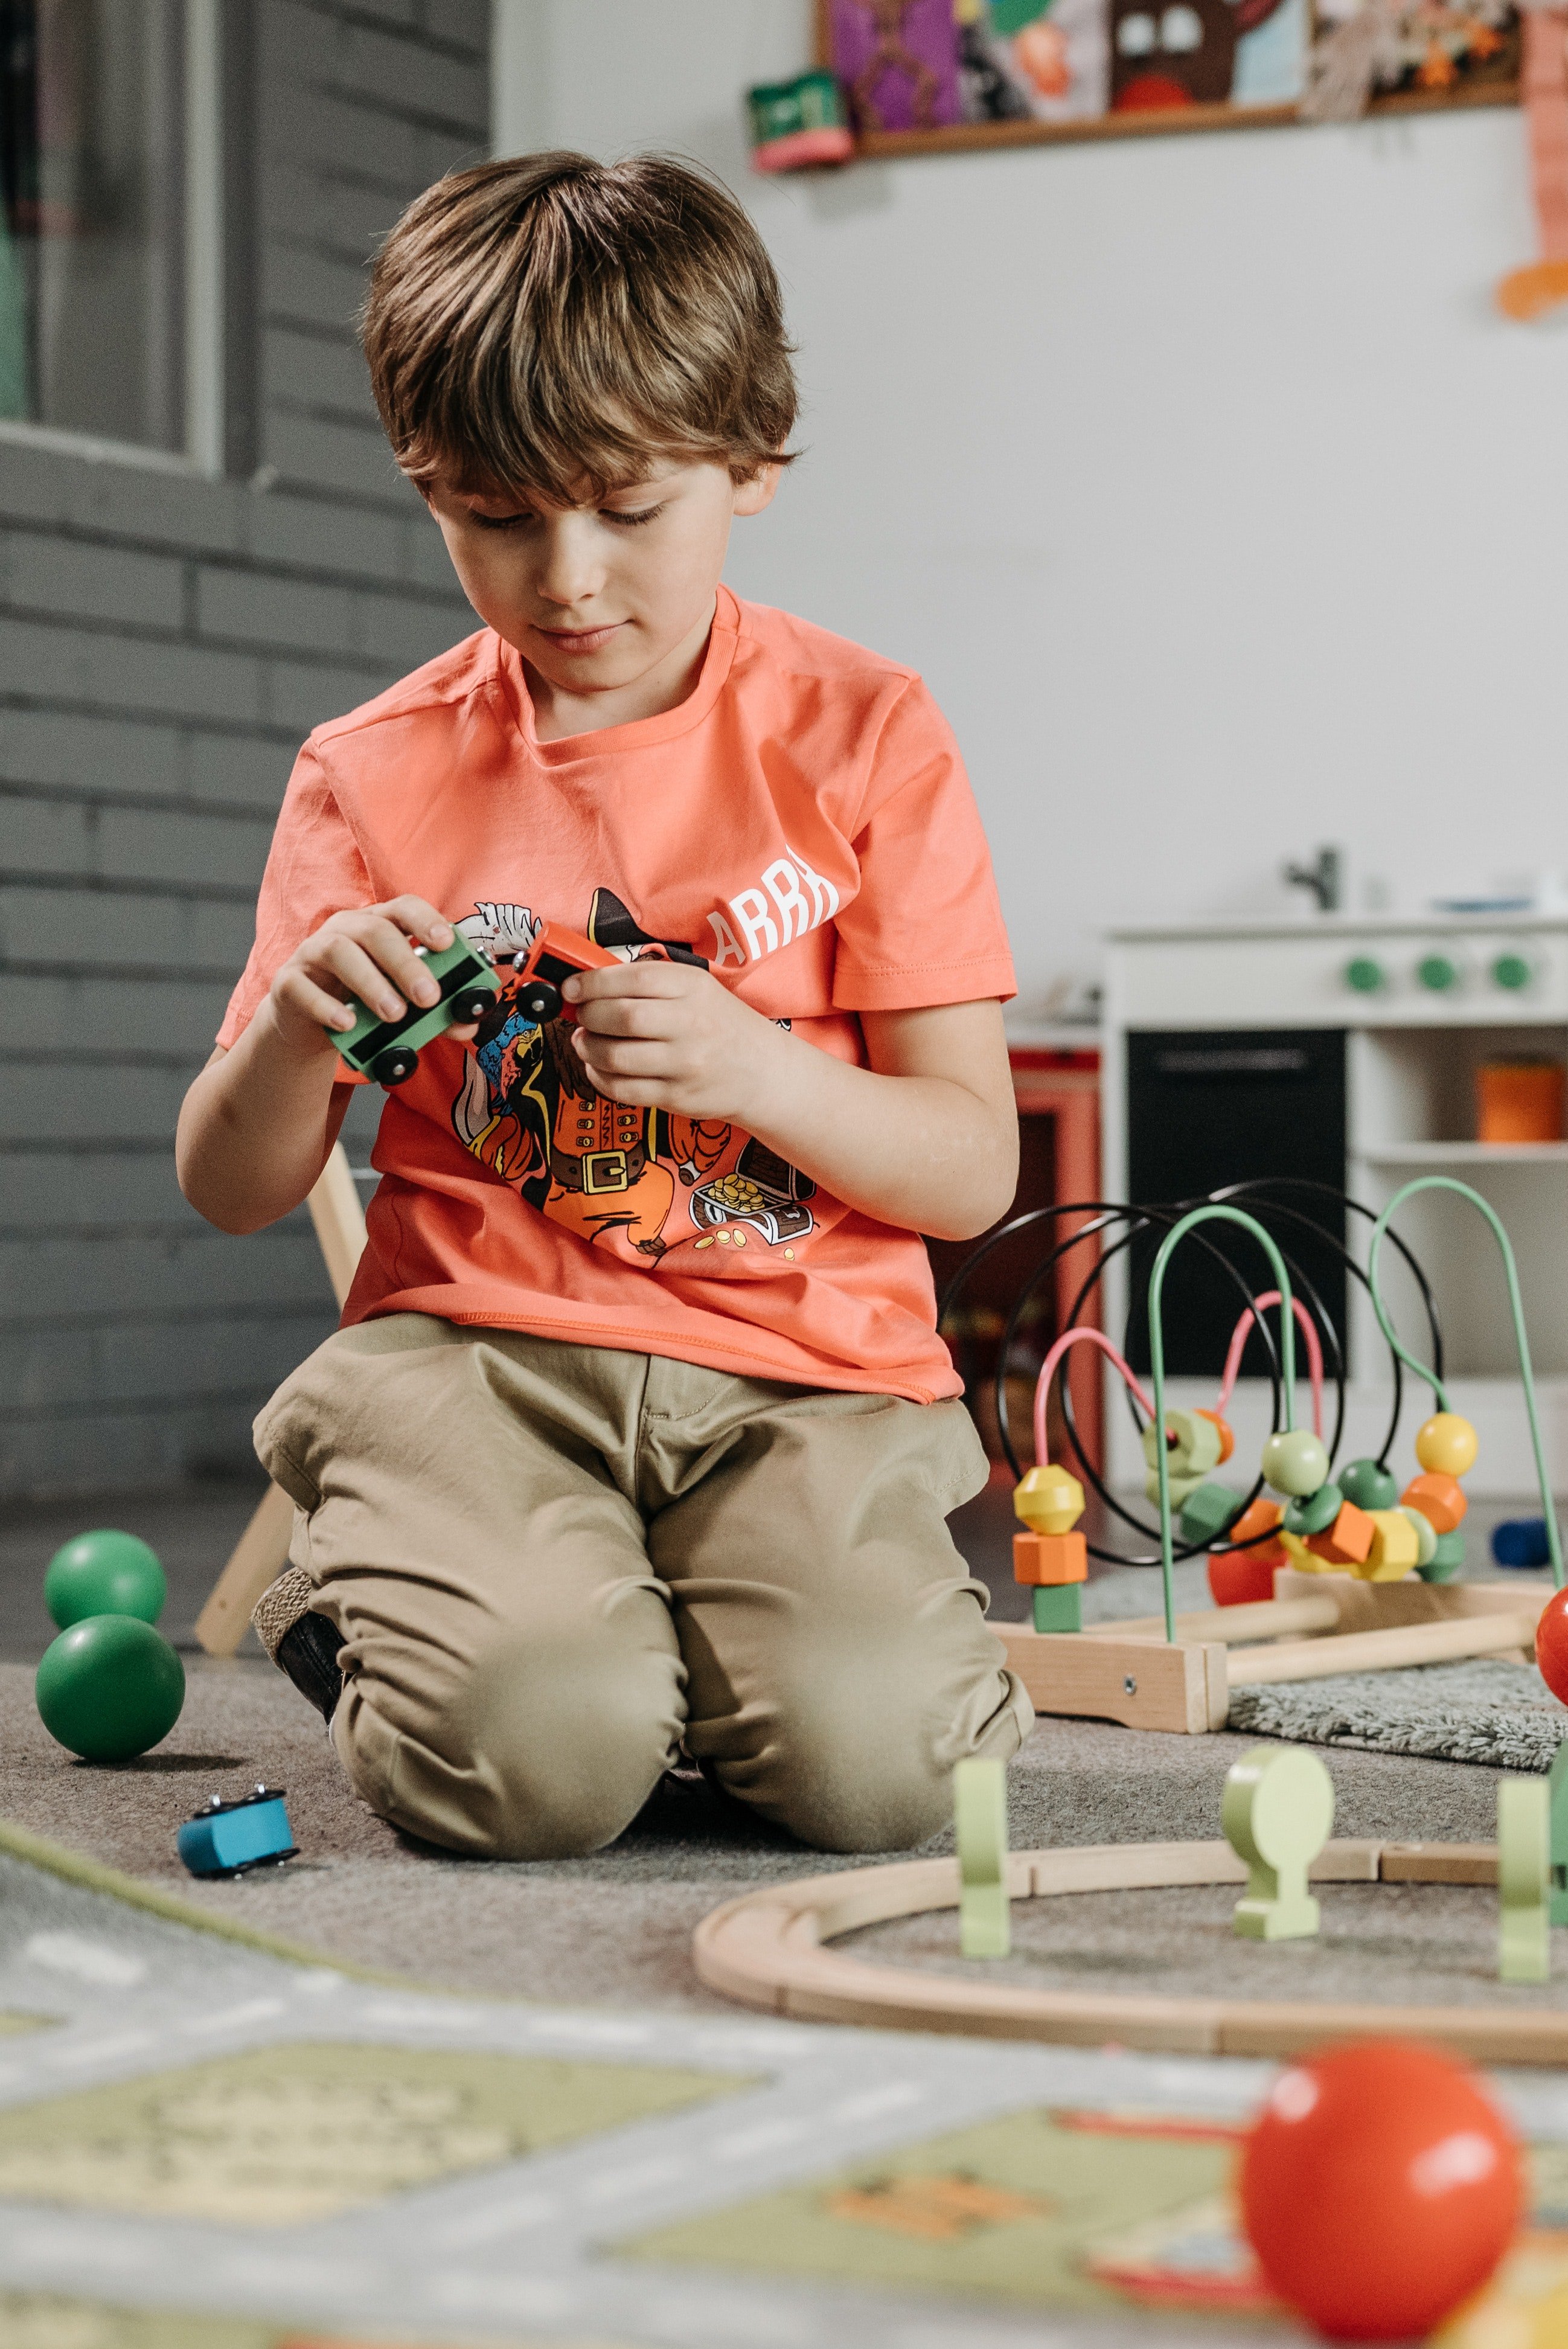 Daniel's mom took him to a doctor who had lots of toys in her office. | Source: Pexels